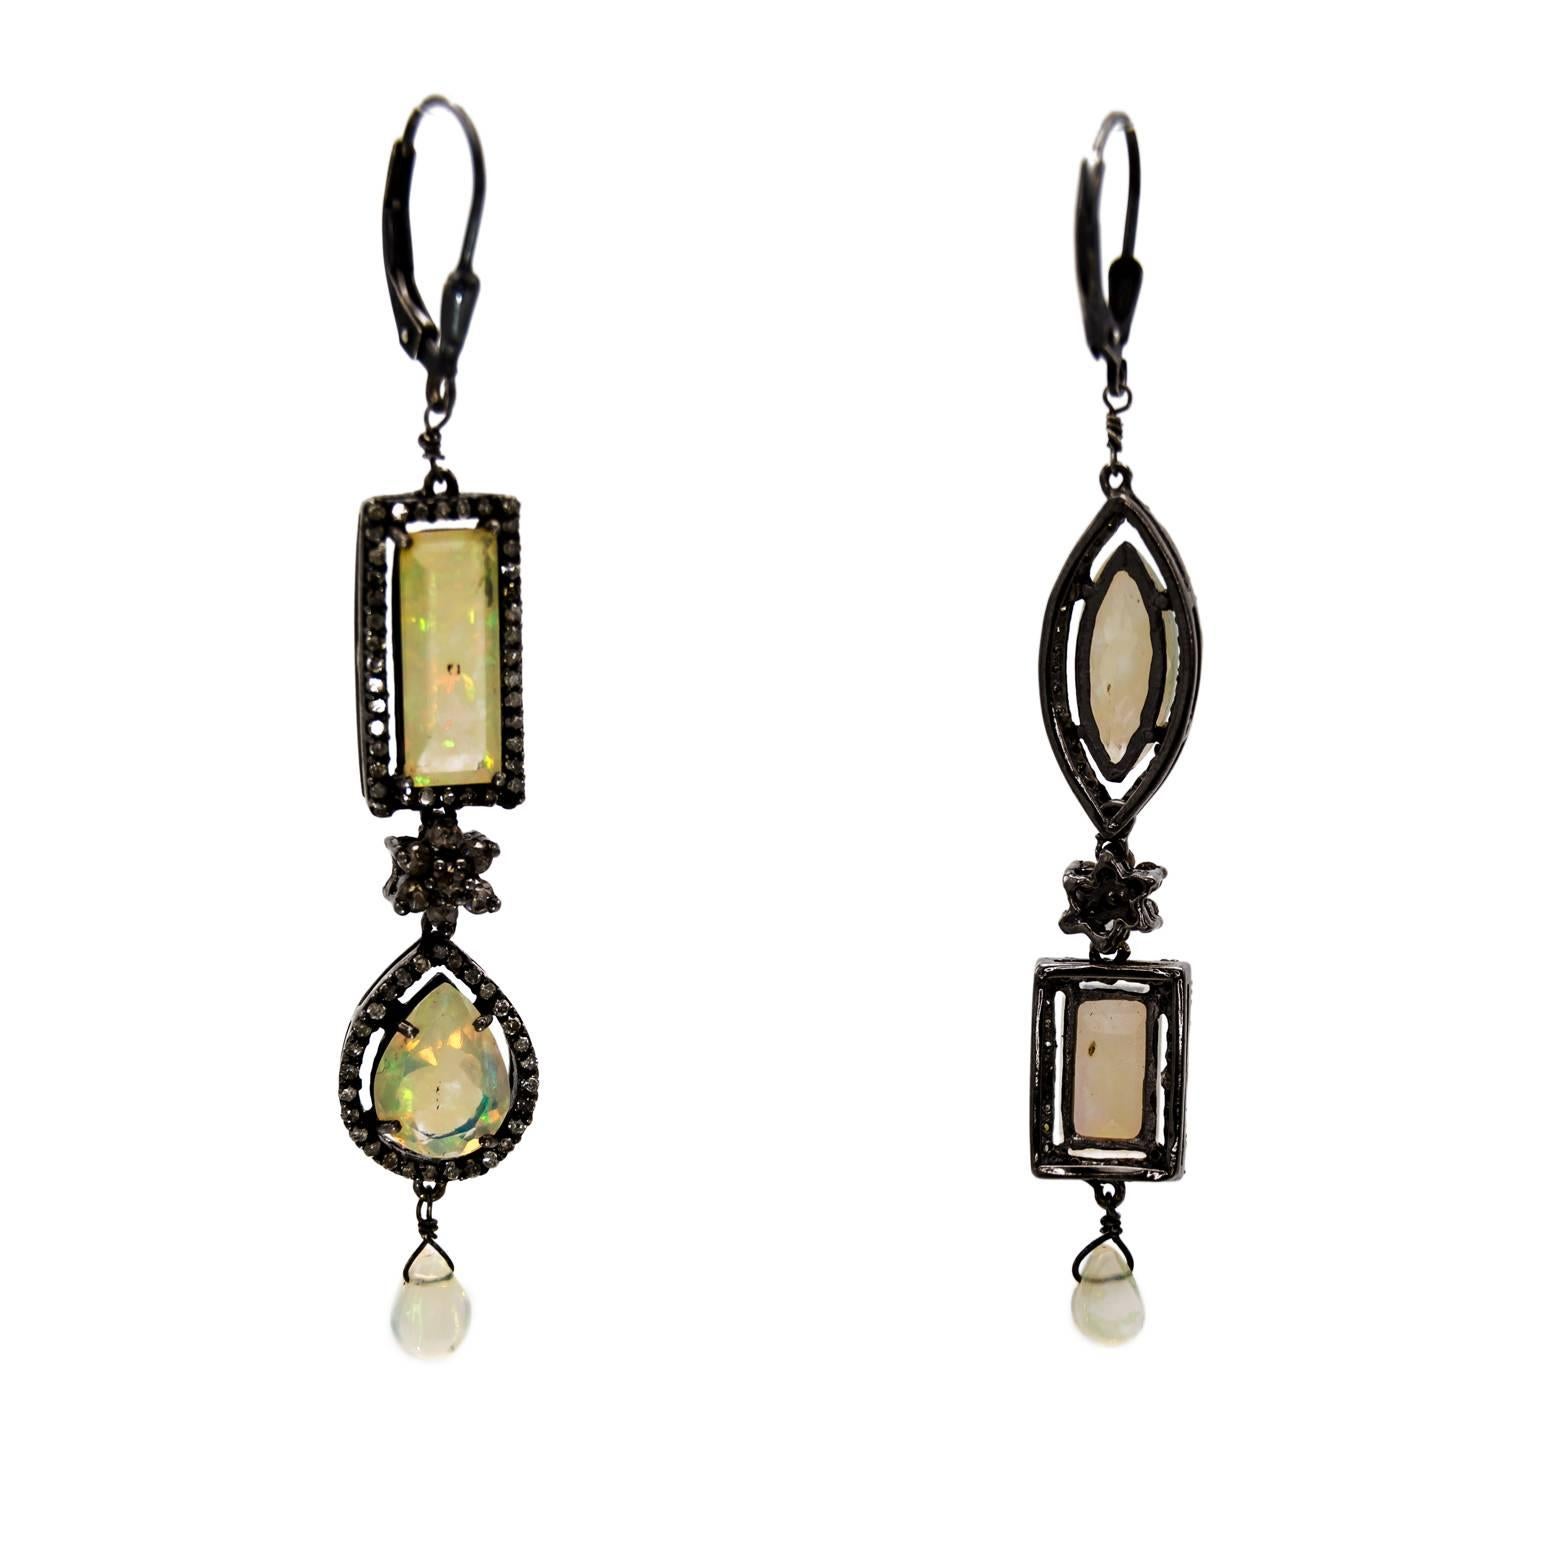 Beautiful architectural dangling earrings decorated with dazzling opals and surrounded in diamonds. These oxidized sterling silver earrings have emerald cut opals, marquise opals, and opal briolettes. The oxidized sterling silver enhances the glow